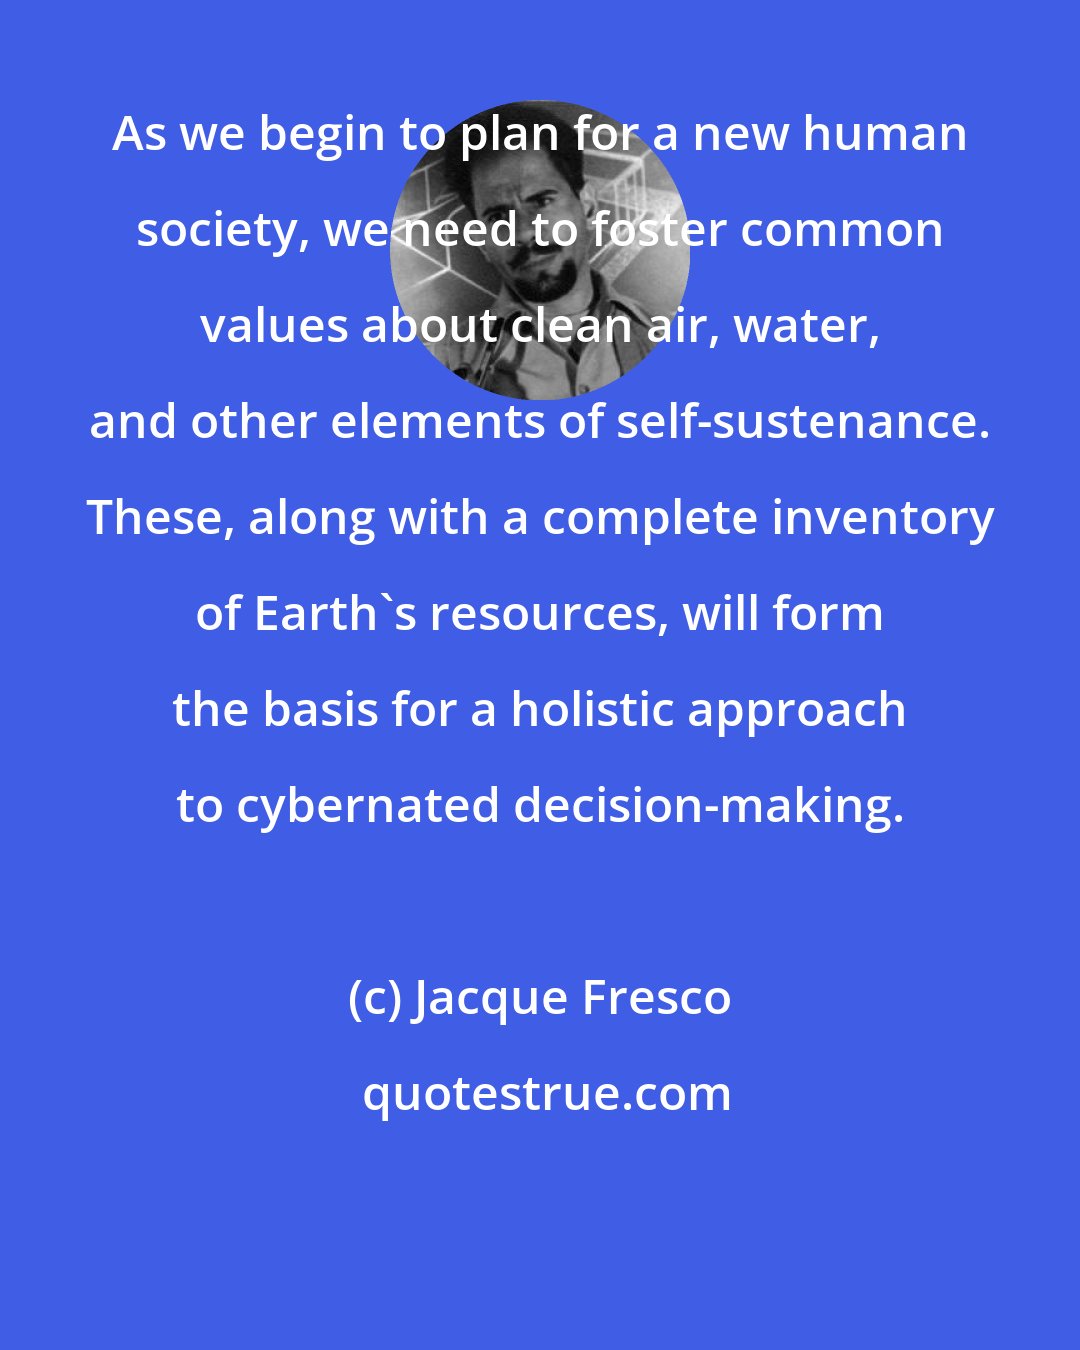 Jacque Fresco: As we begin to plan for a new human society, we need to foster common values about clean air, water, and other elements of self-sustenance. These, along with a complete inventory of Earth's resources, will form the basis for a holistic approach to cybernated decision-making.